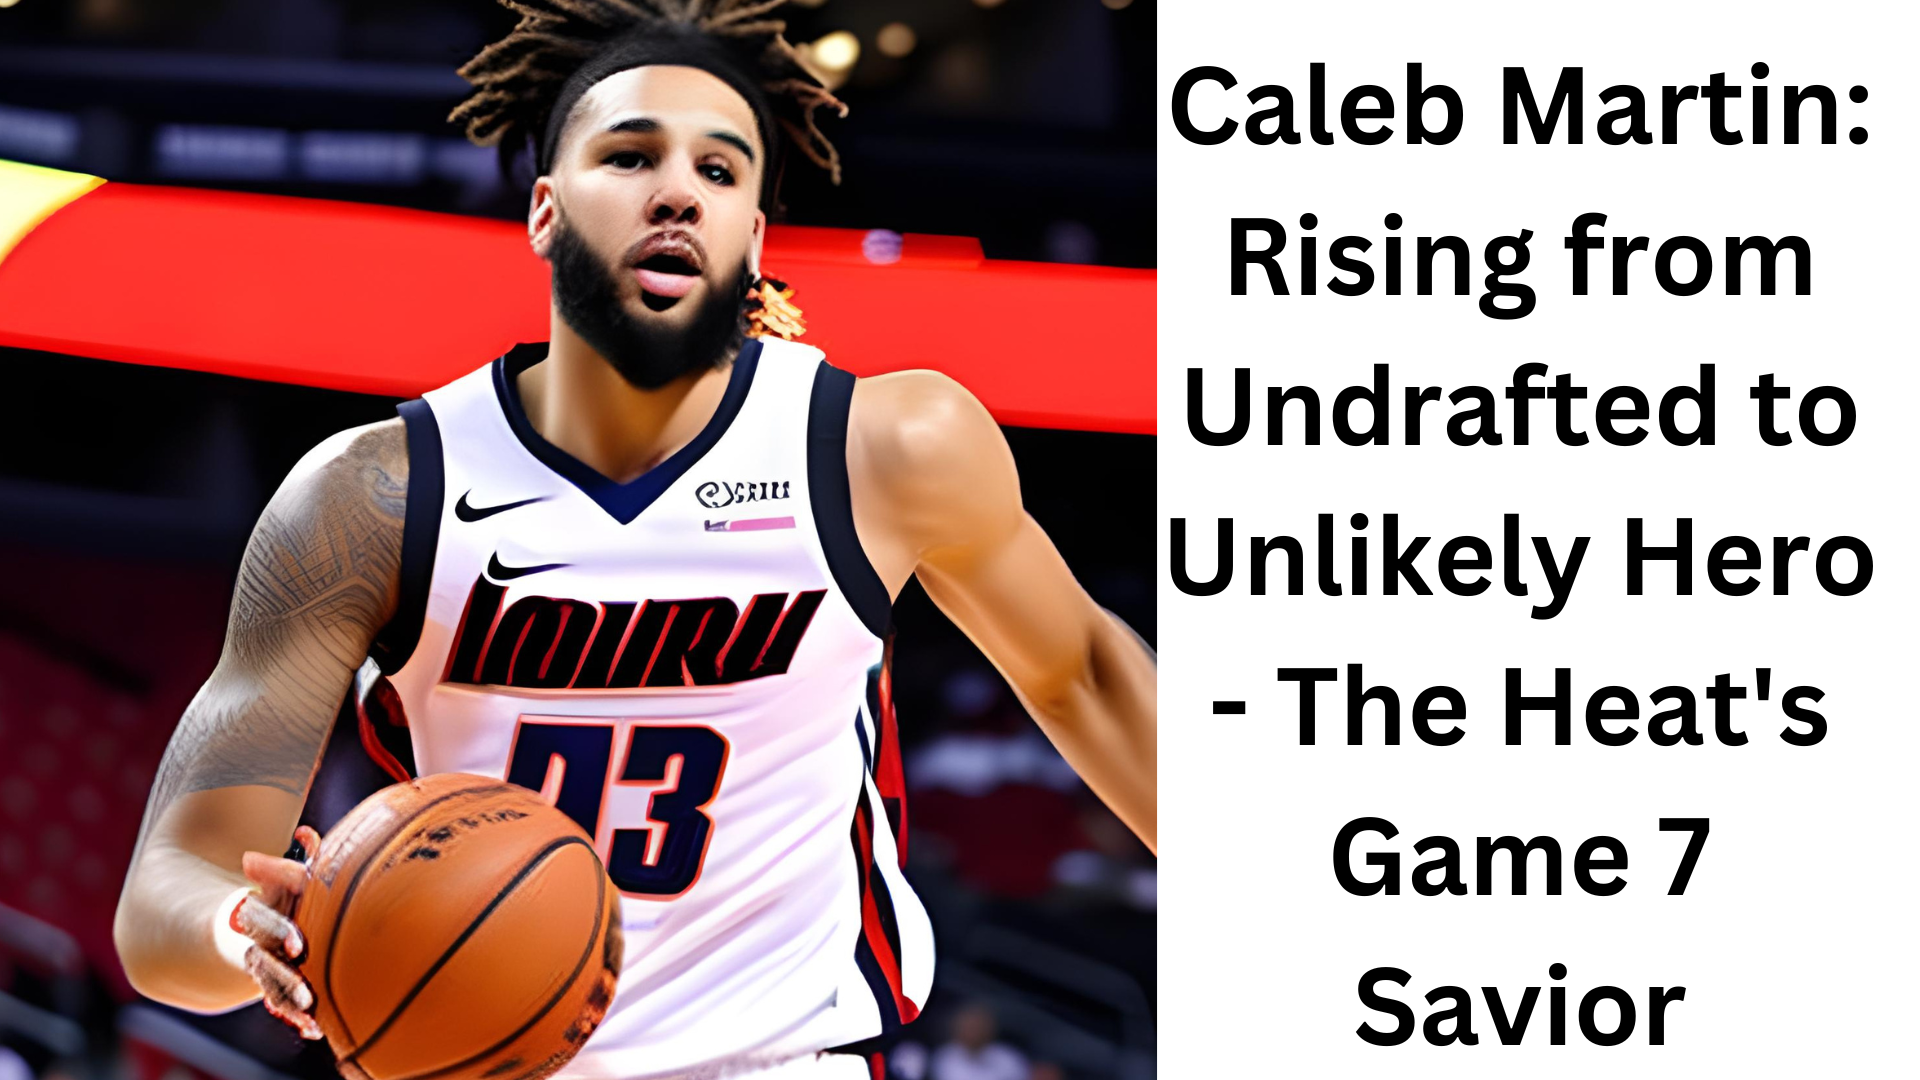 Caleb Martin Rising from Undrafted to Unlikely Hero - The Heat's Game 7 Savior